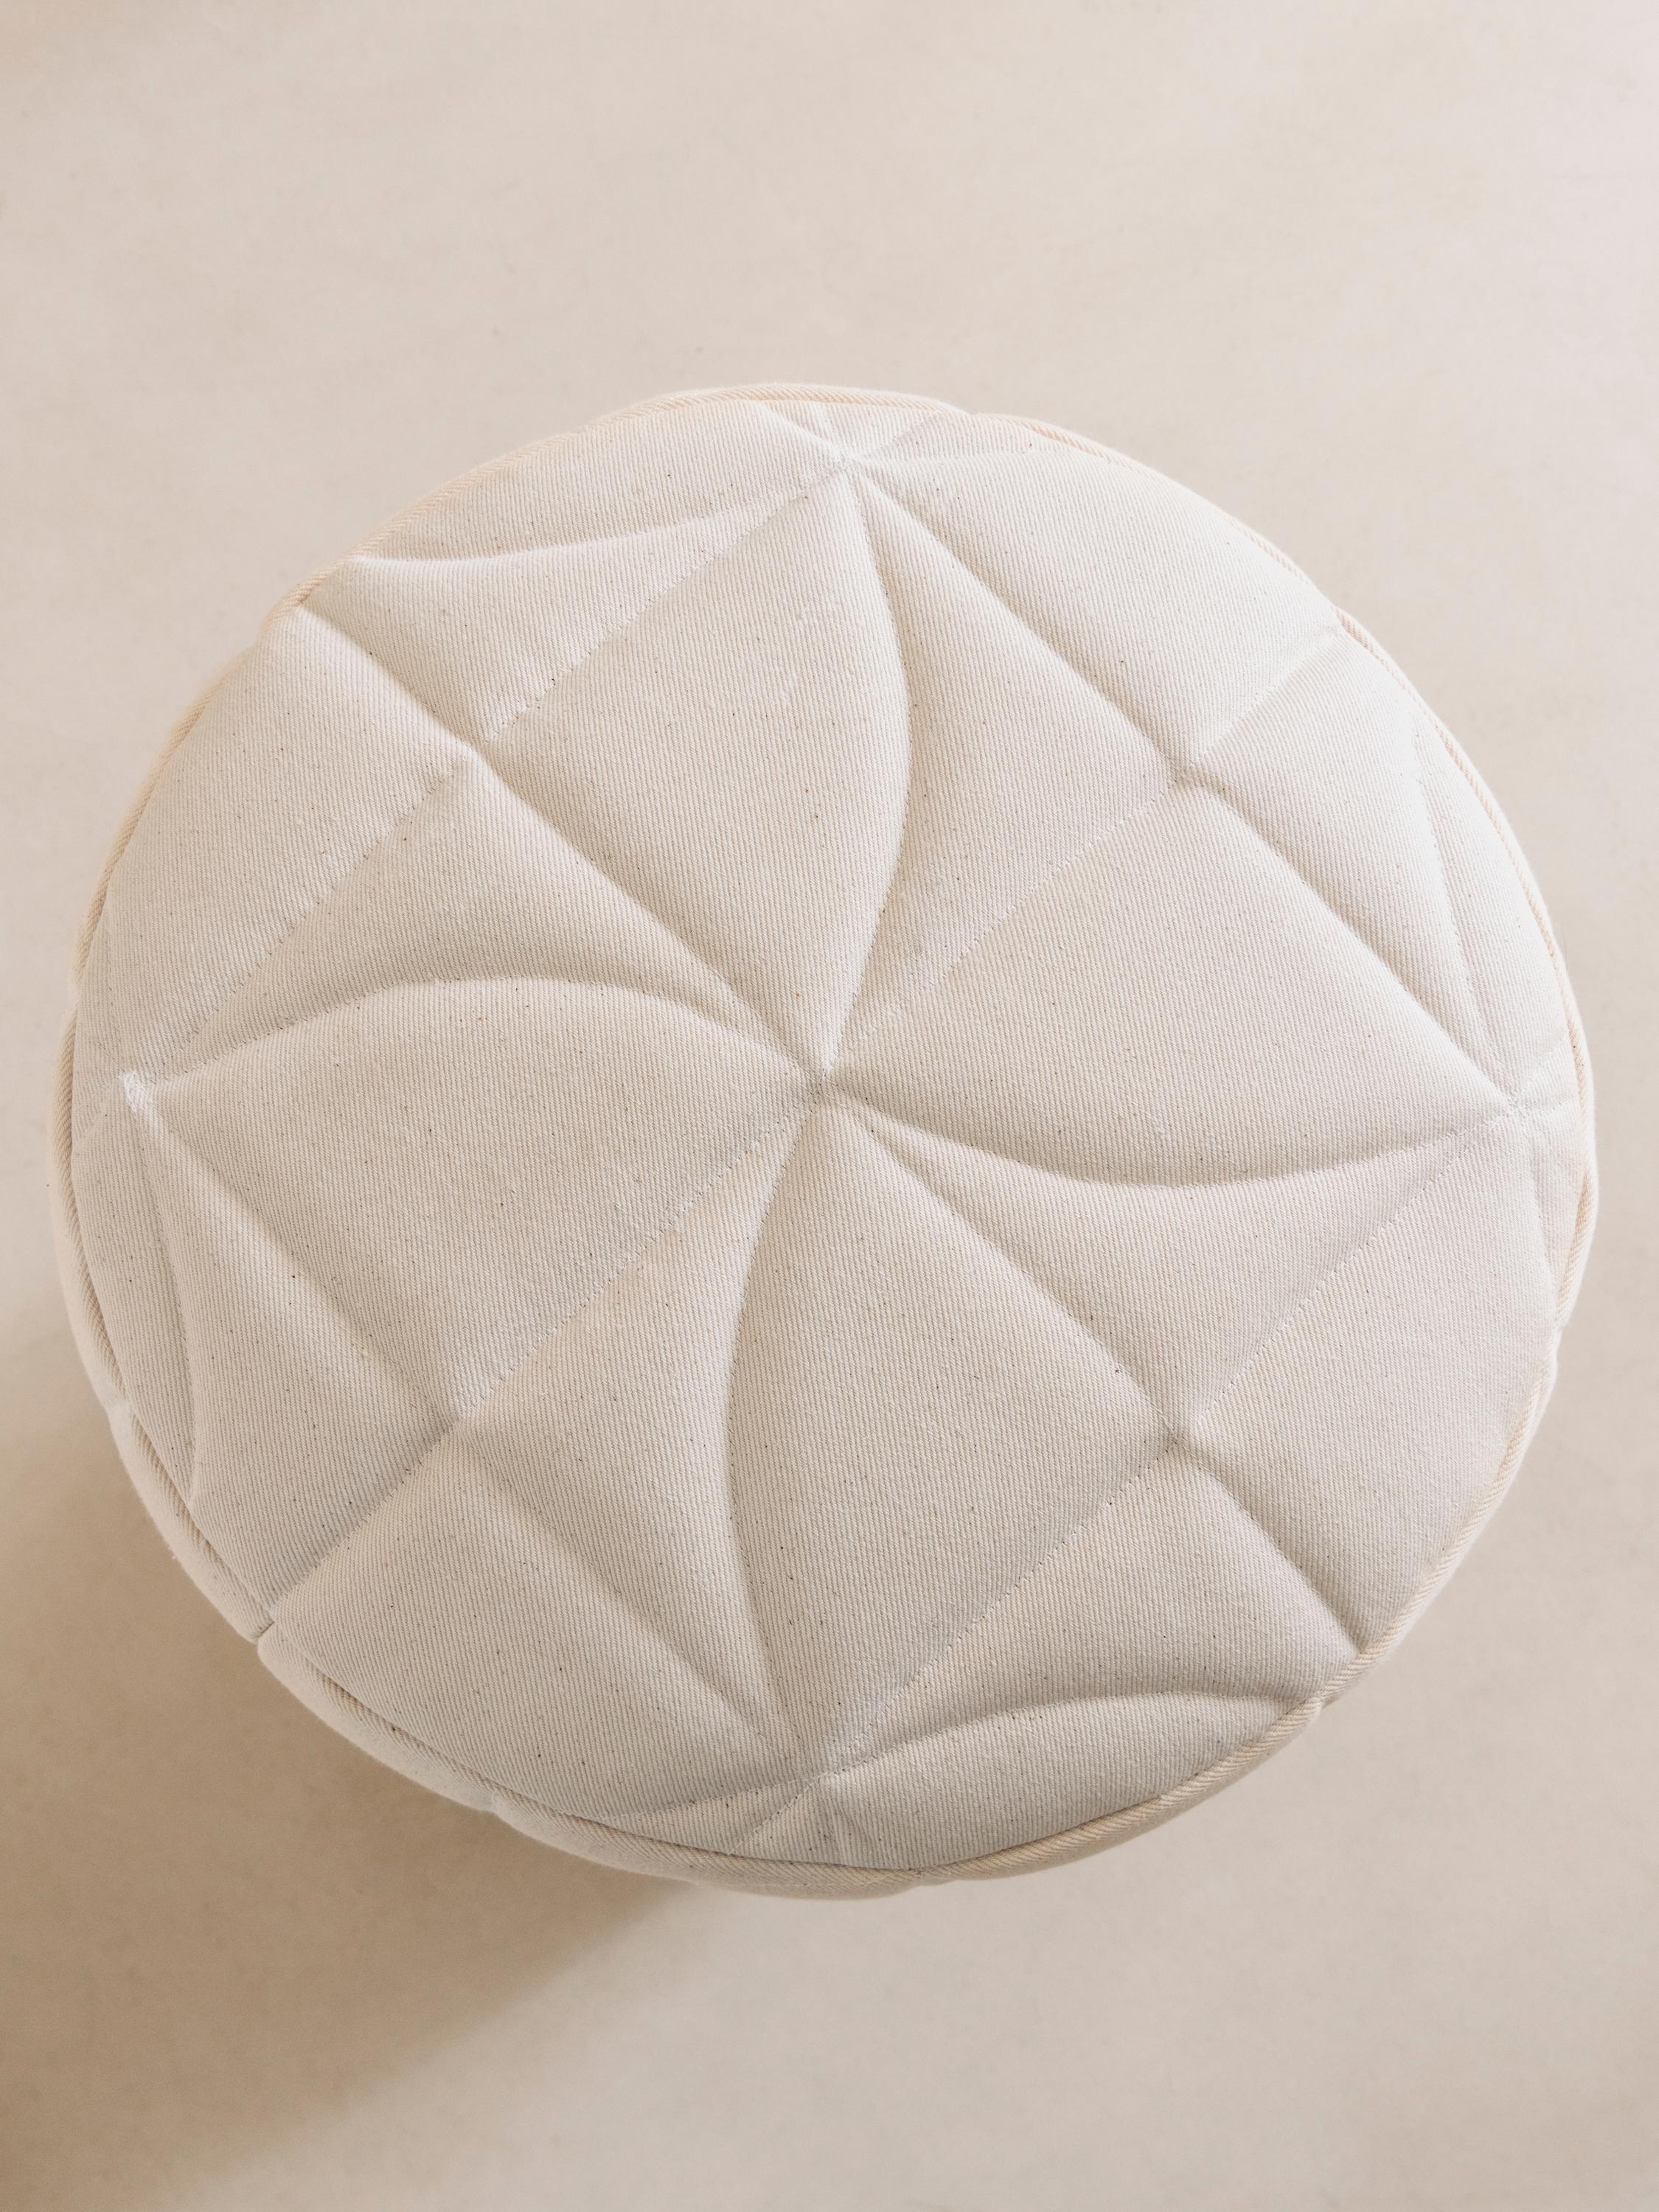 American Contemporary Quilted Stool For Sale